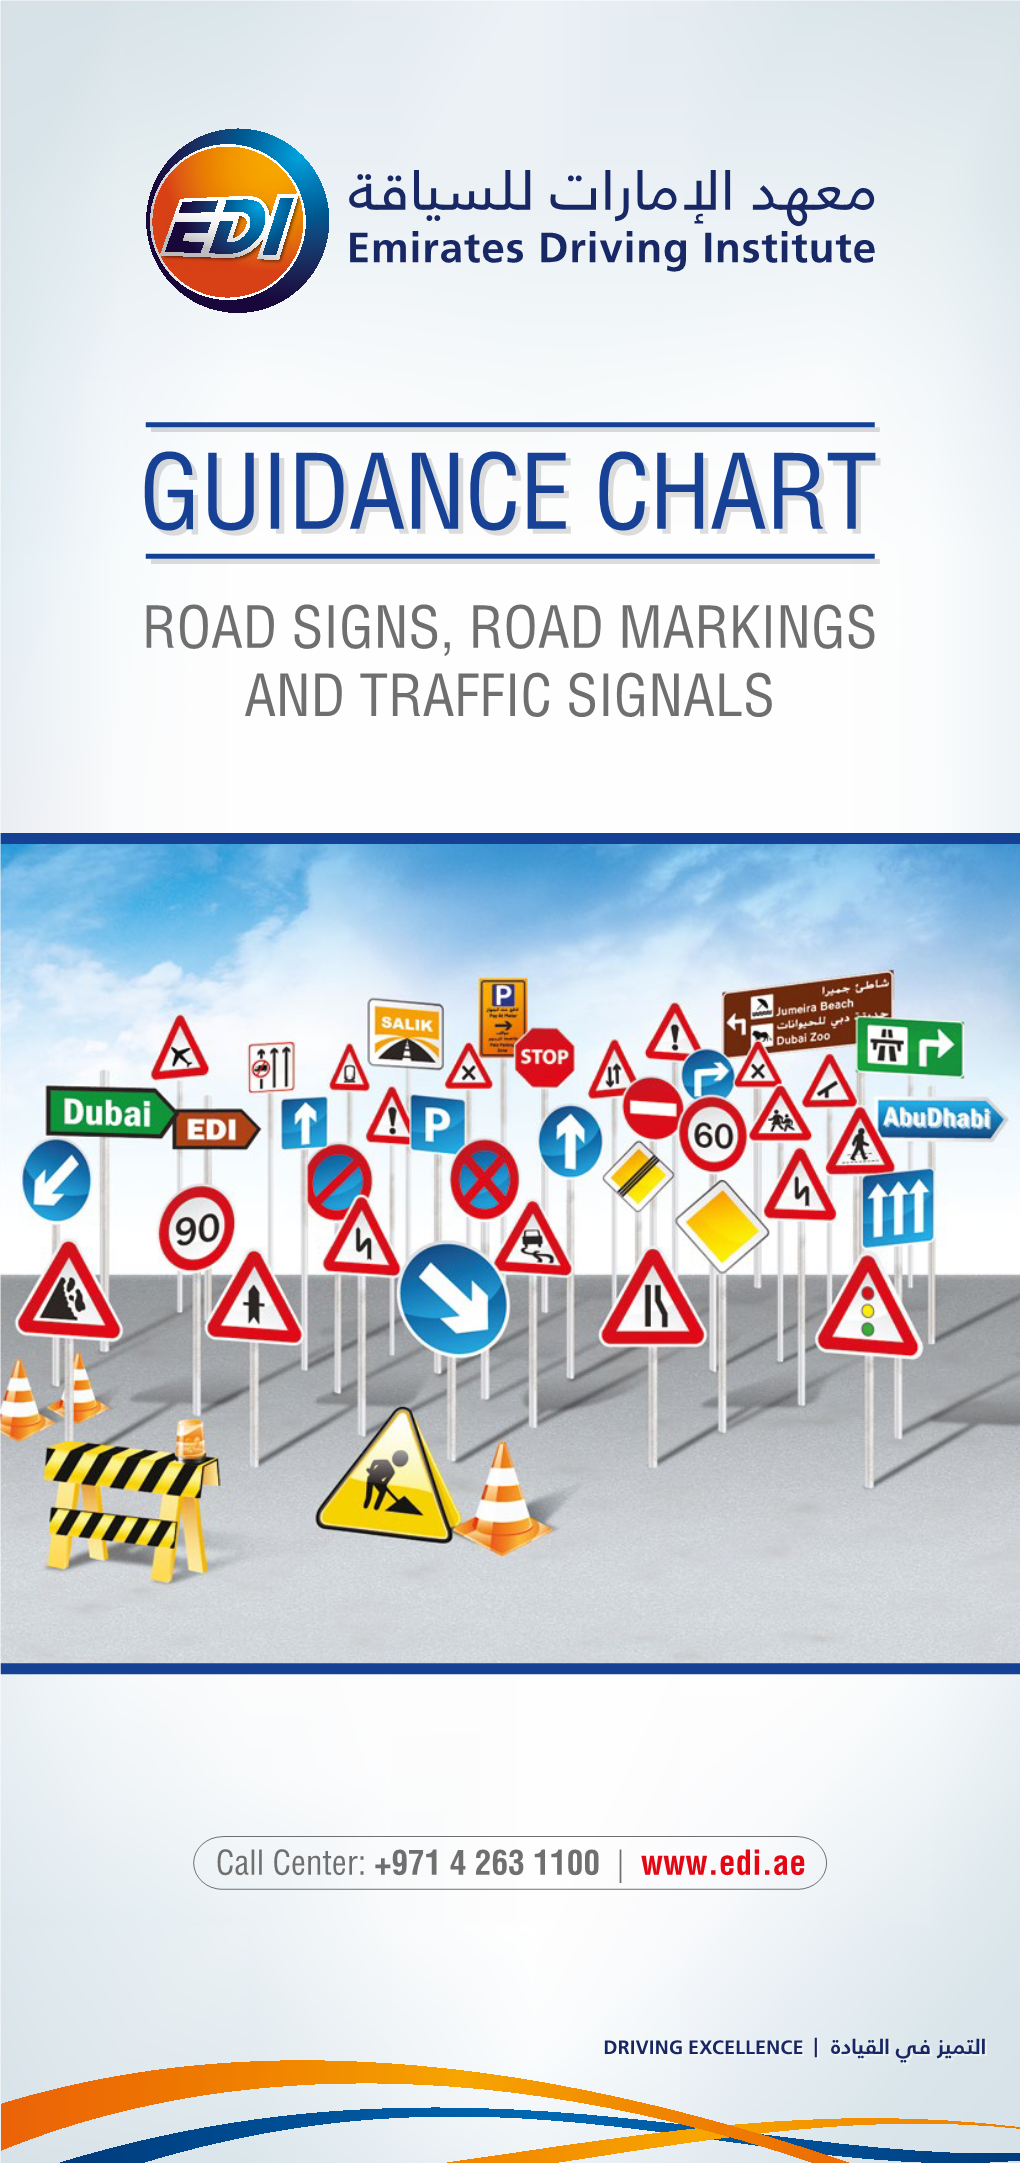 Guidance Chartchart Road Signs, Road Markings and Traffic Signals